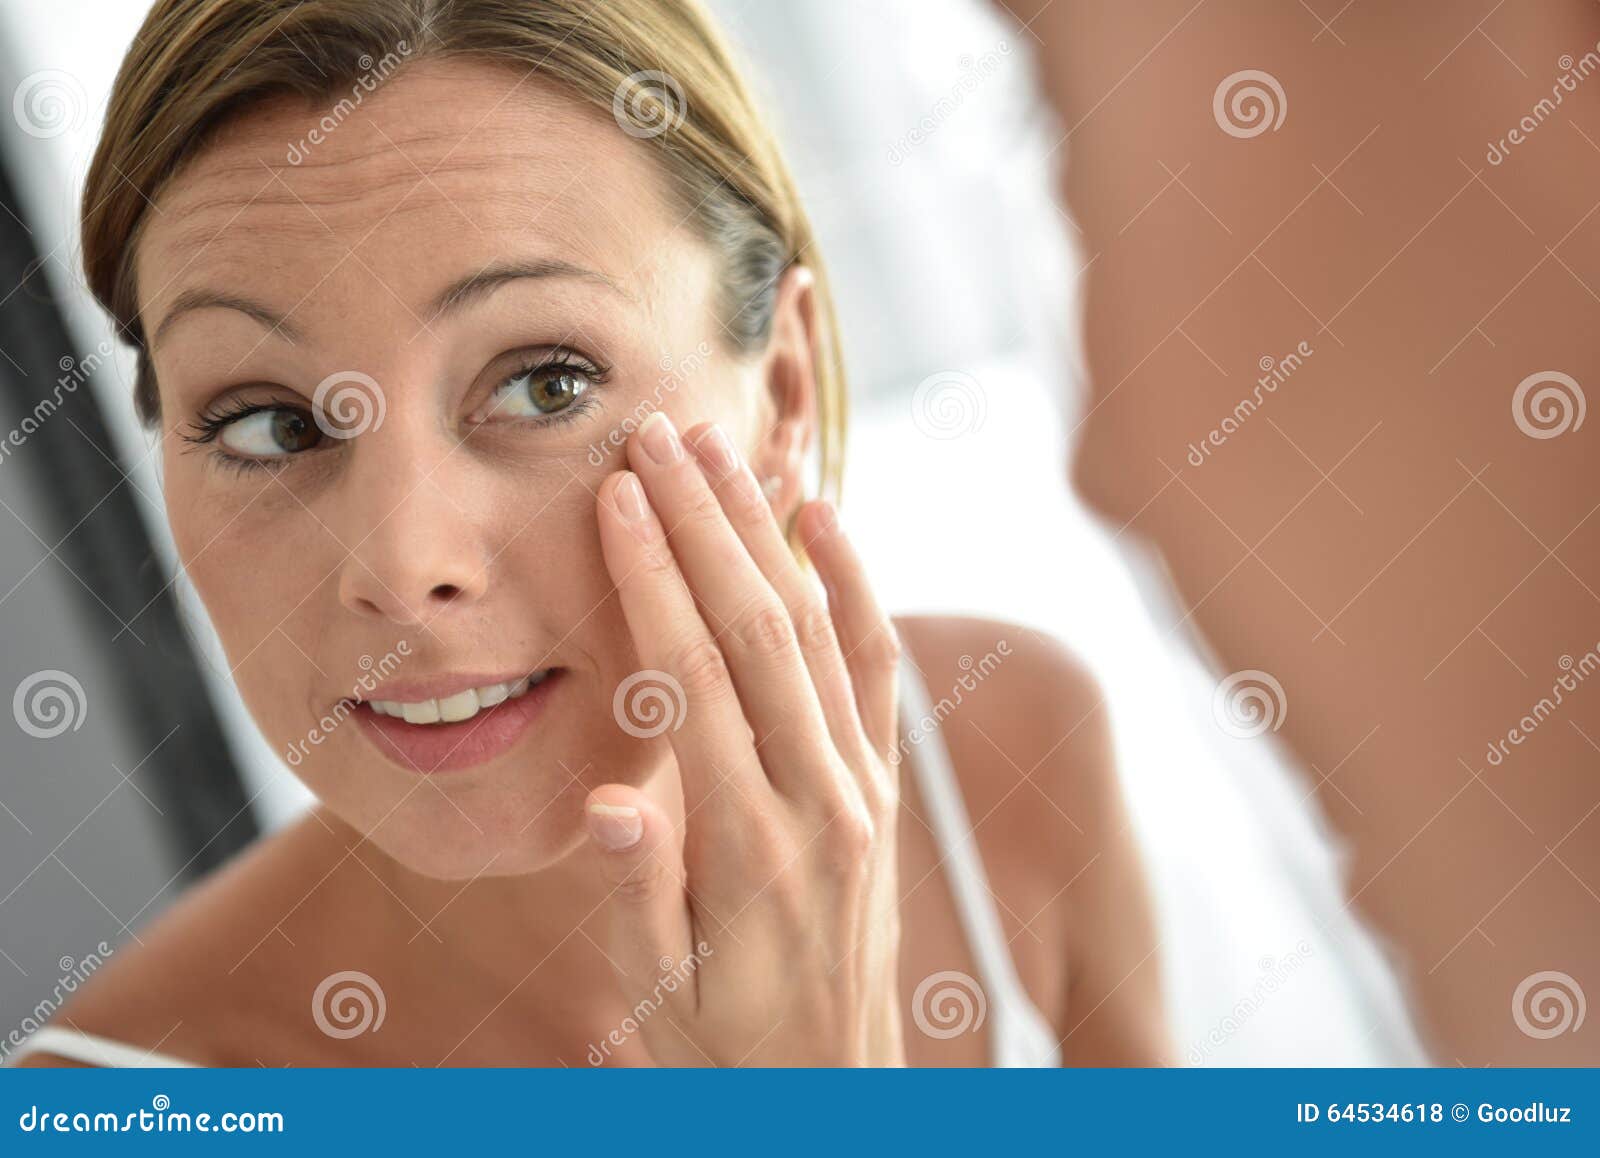 woman applying daily cream on her face